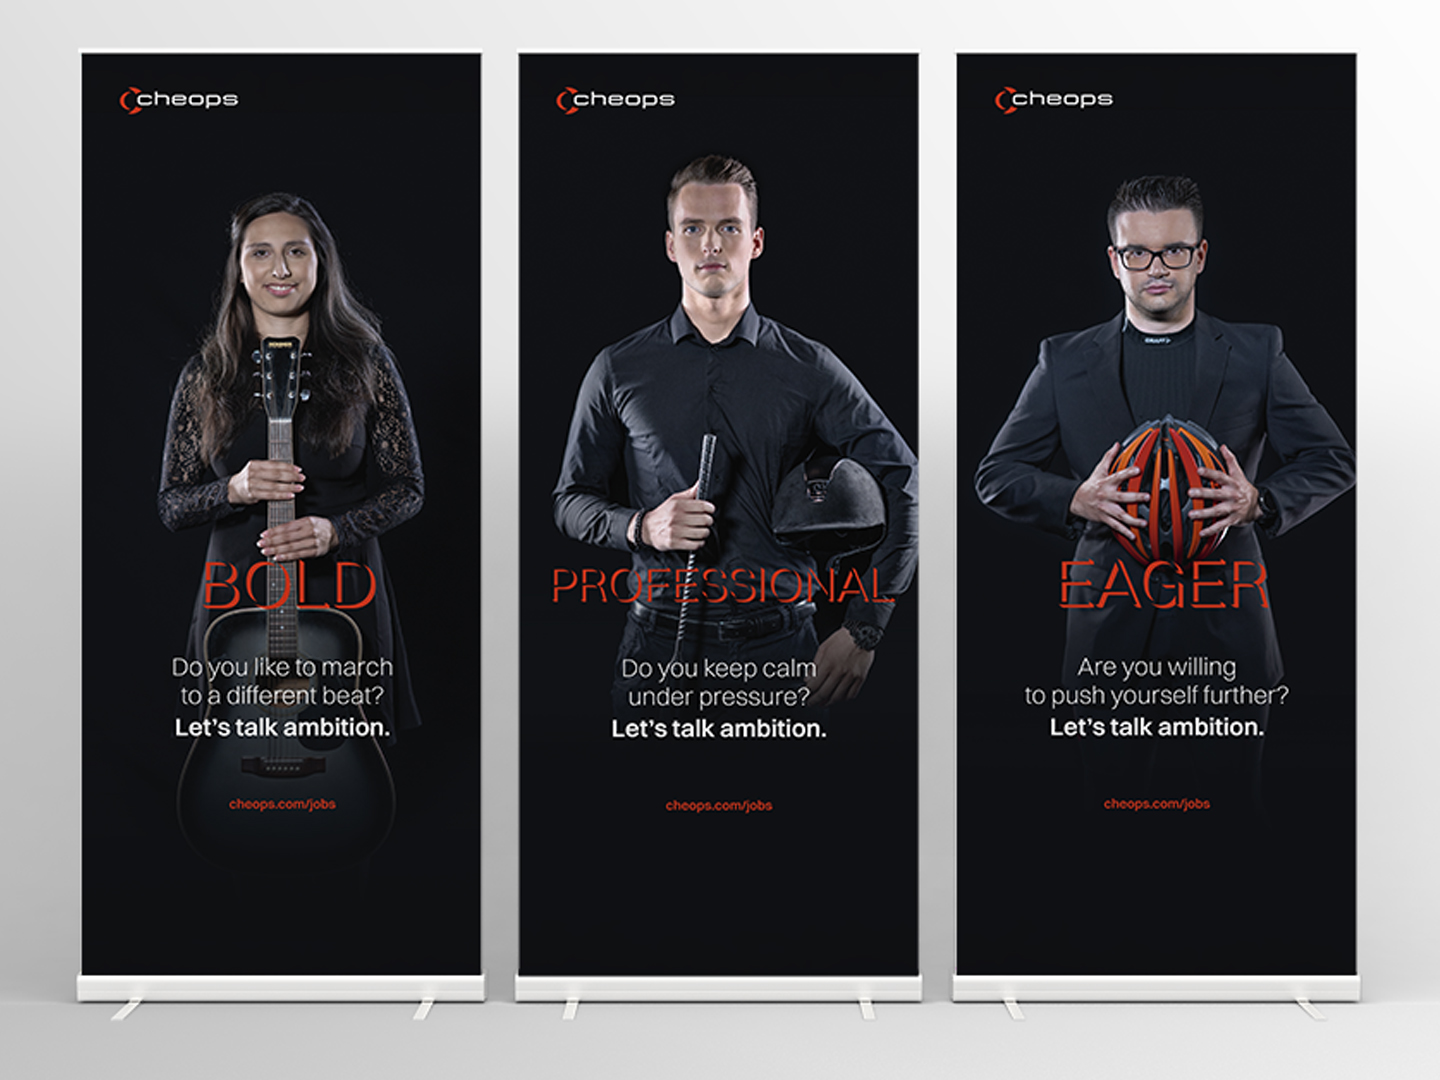 new Cheops Employer Brand strategy, brand story, creative employer recruiting campaign and internal employee communications